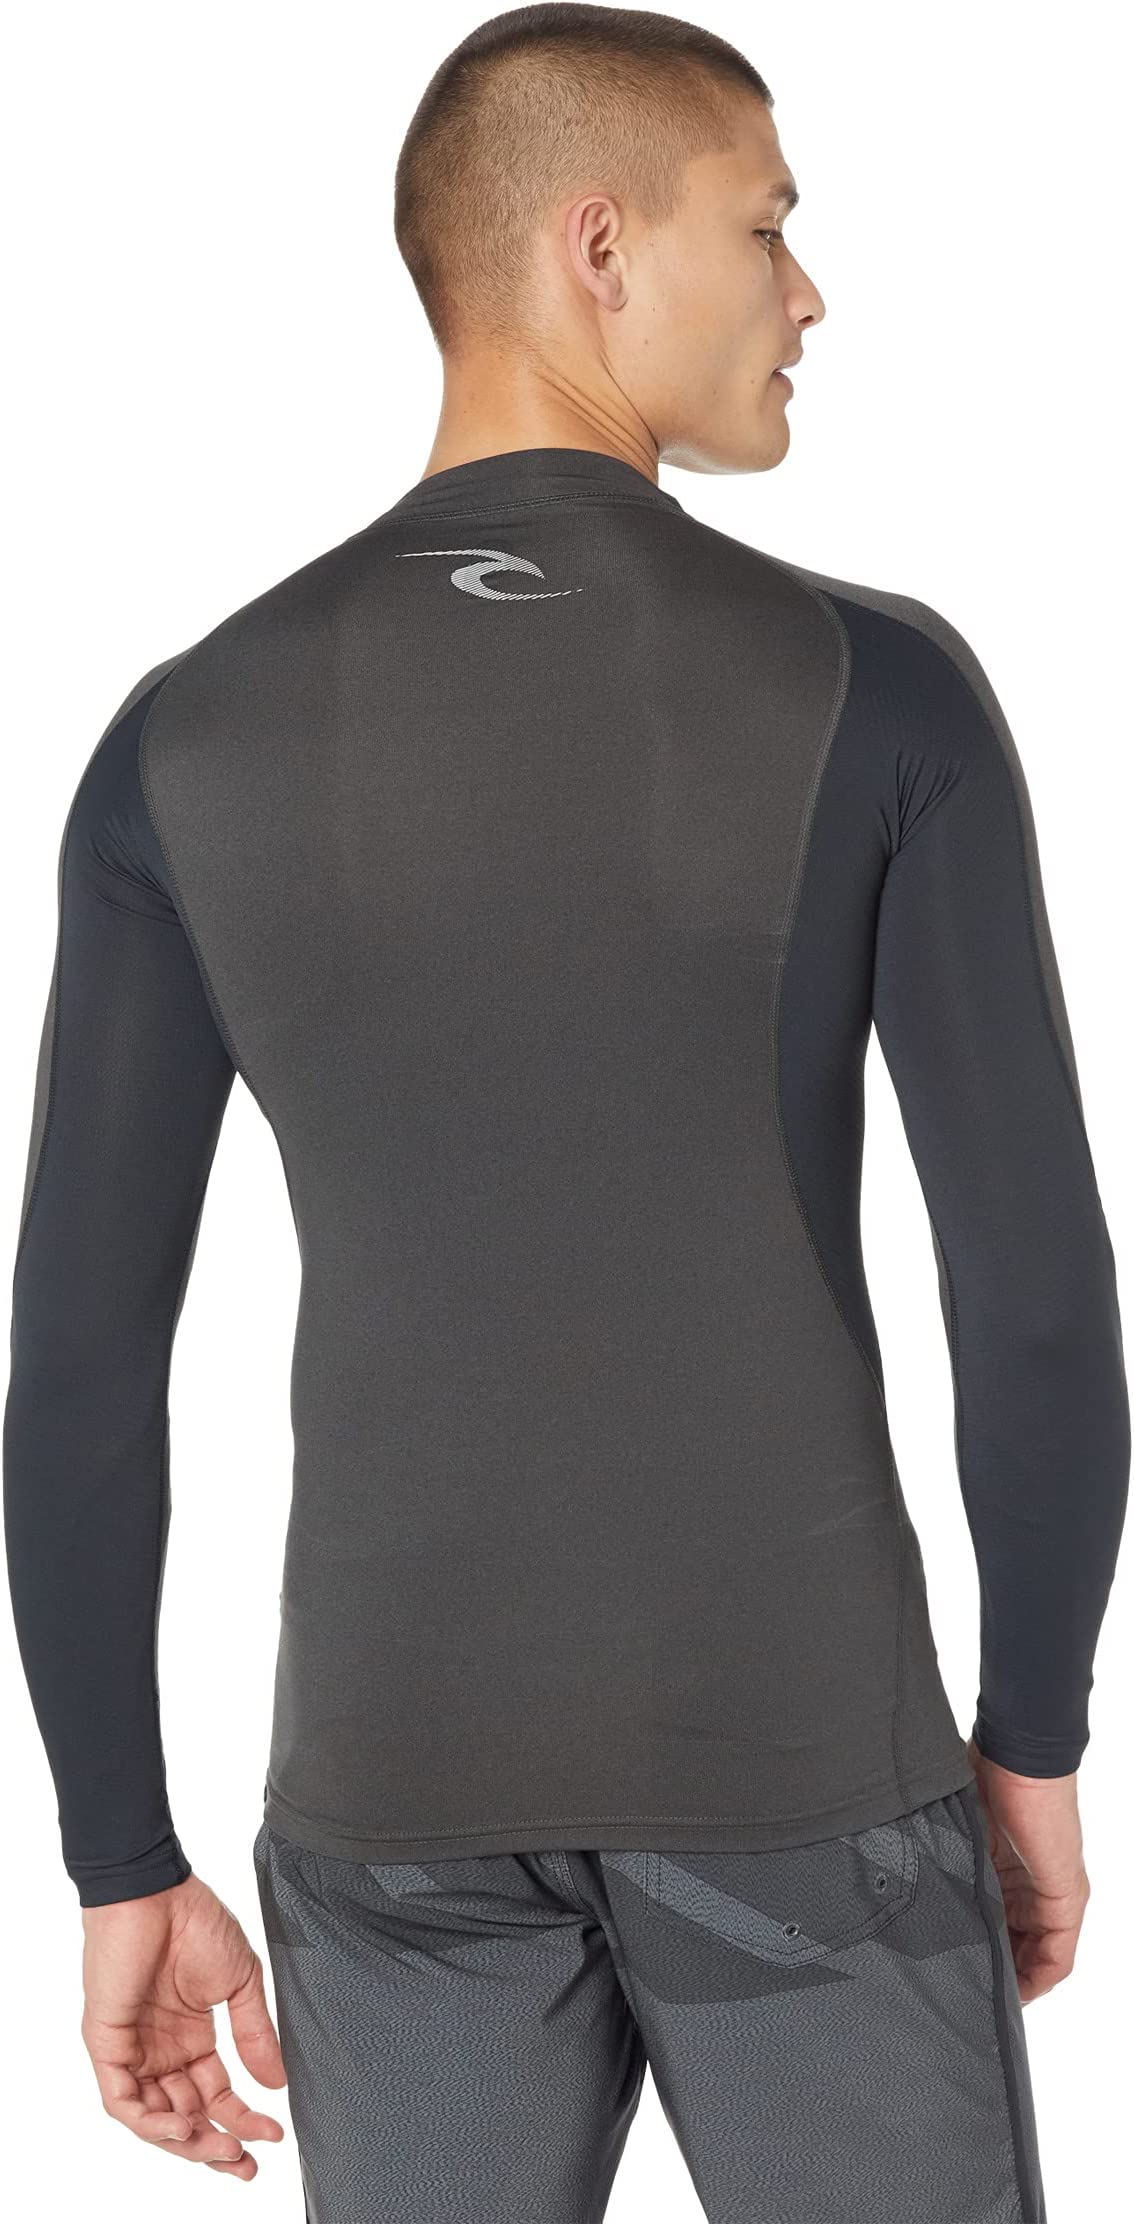 2023 New arrival Promotion Rip Curl Waves Performance Long Sleeve UV ...